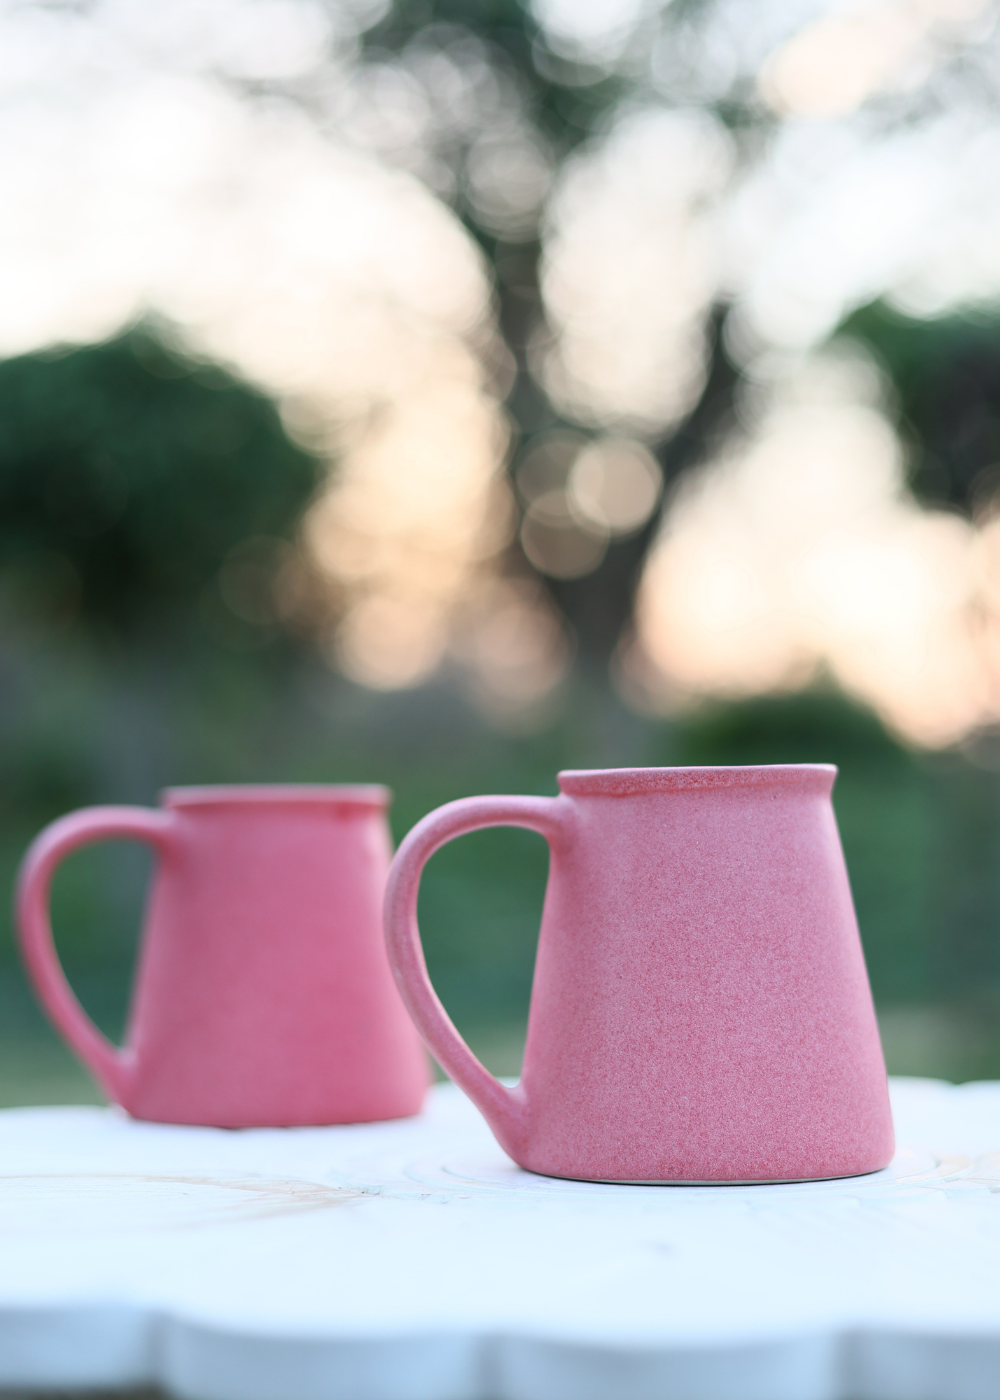 Two basic pink coffee mug in a open area